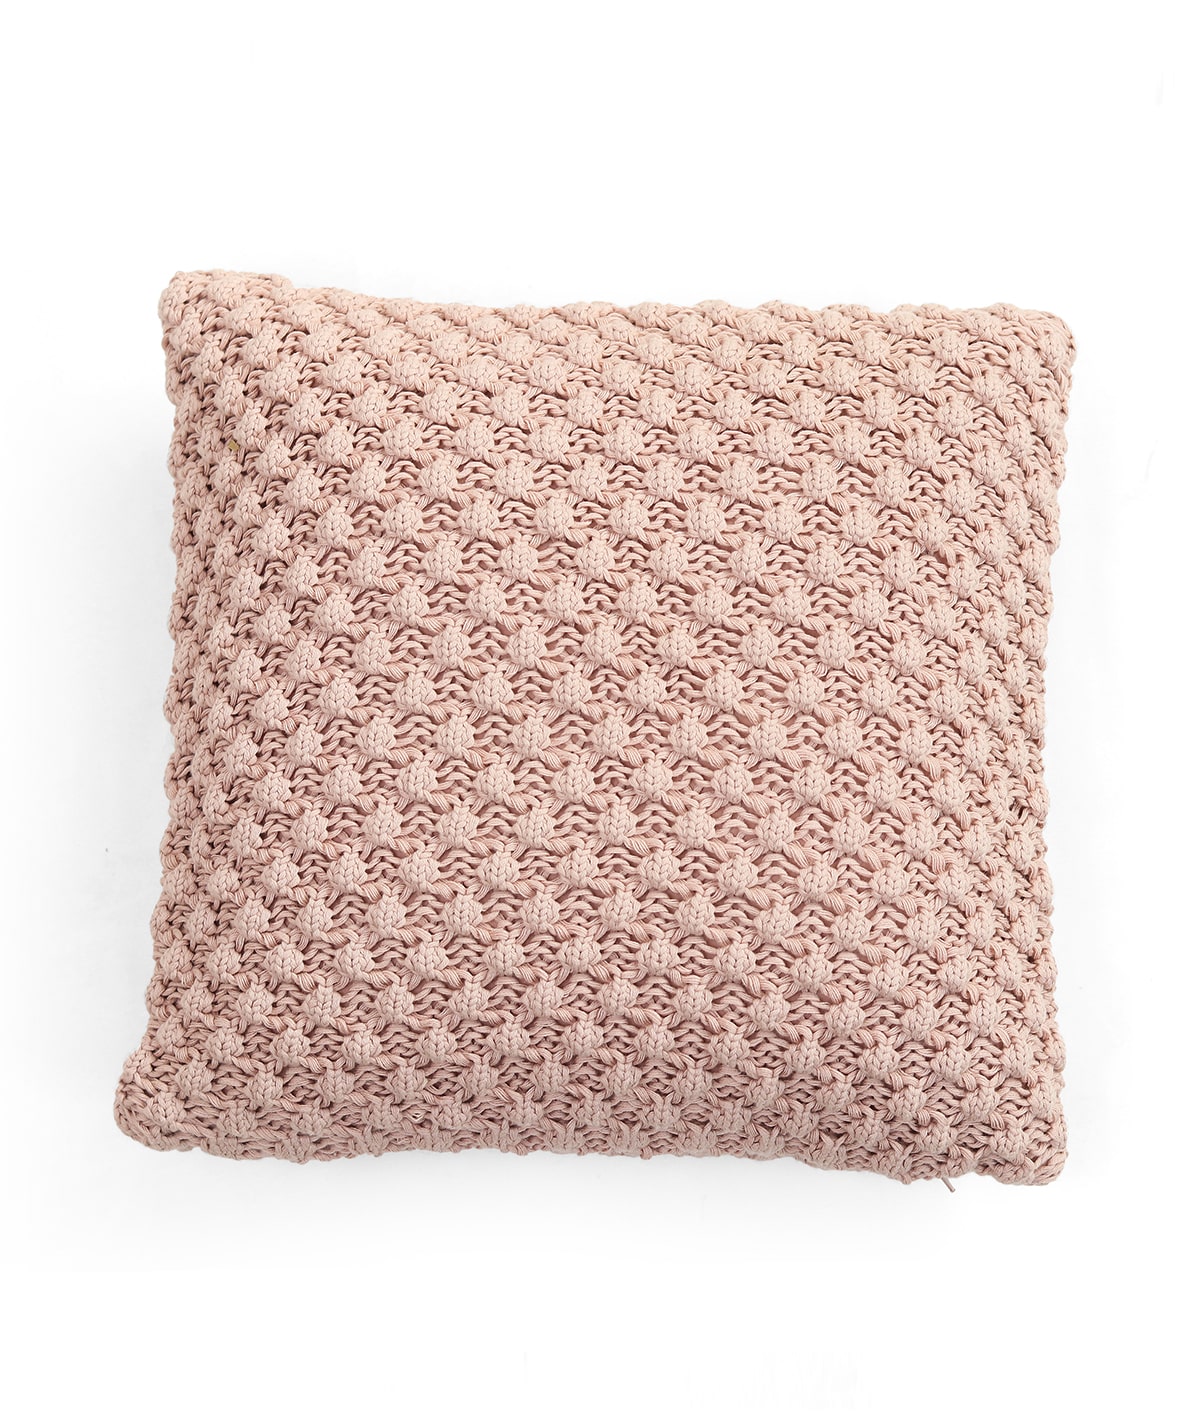 Popcorn Knit Cameo Pink Cotton Knitted Decorative 16 X 16 Inches Cushion Cover